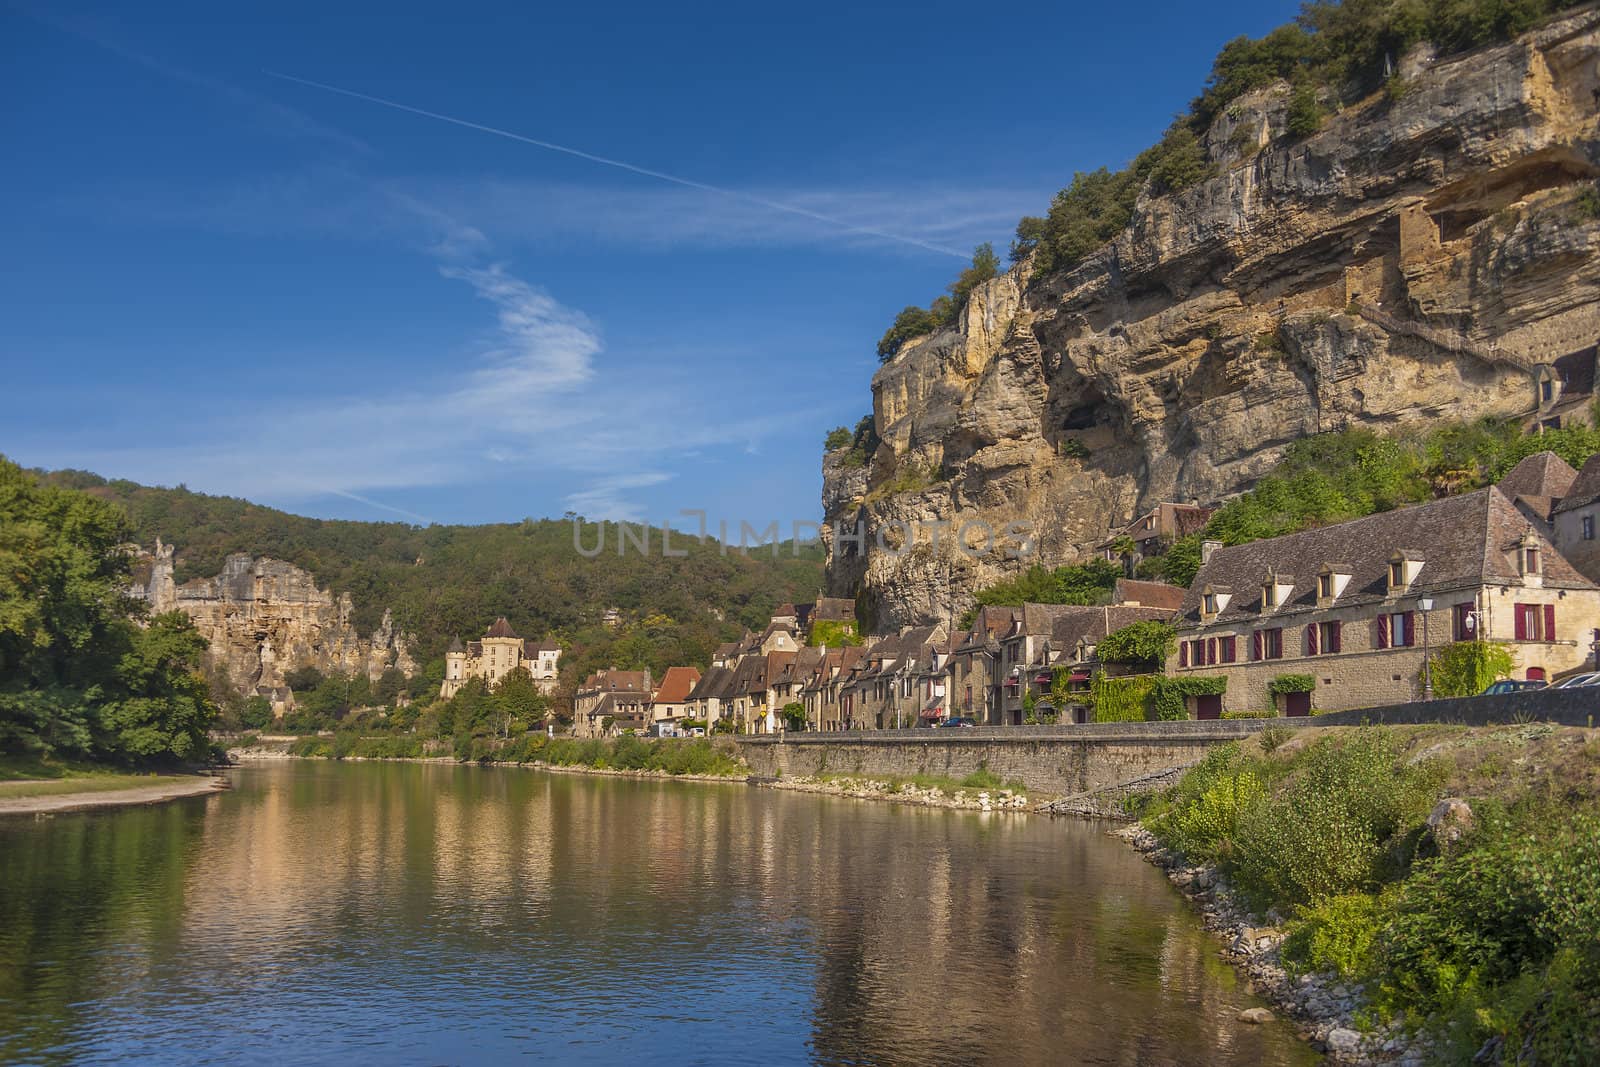 View of the town of Roc Gageac, Dordogne, France